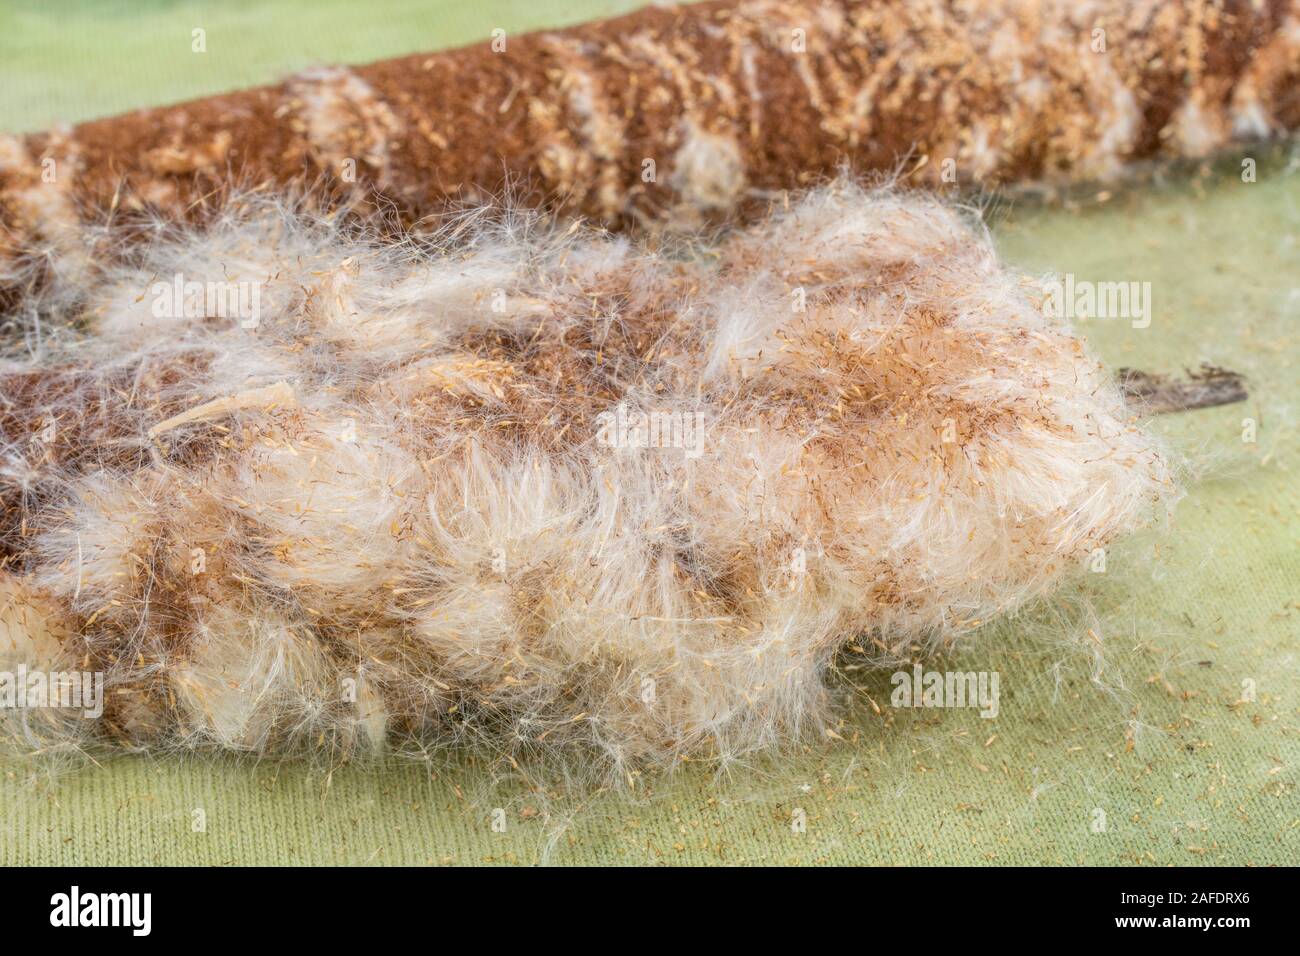 Fluffy seed head of Greater Reedmace / Typha latifolia aka Bulrush. The 'down' used tinder in emergency survival fire-lighting. Survival knowledge. Stock Photo